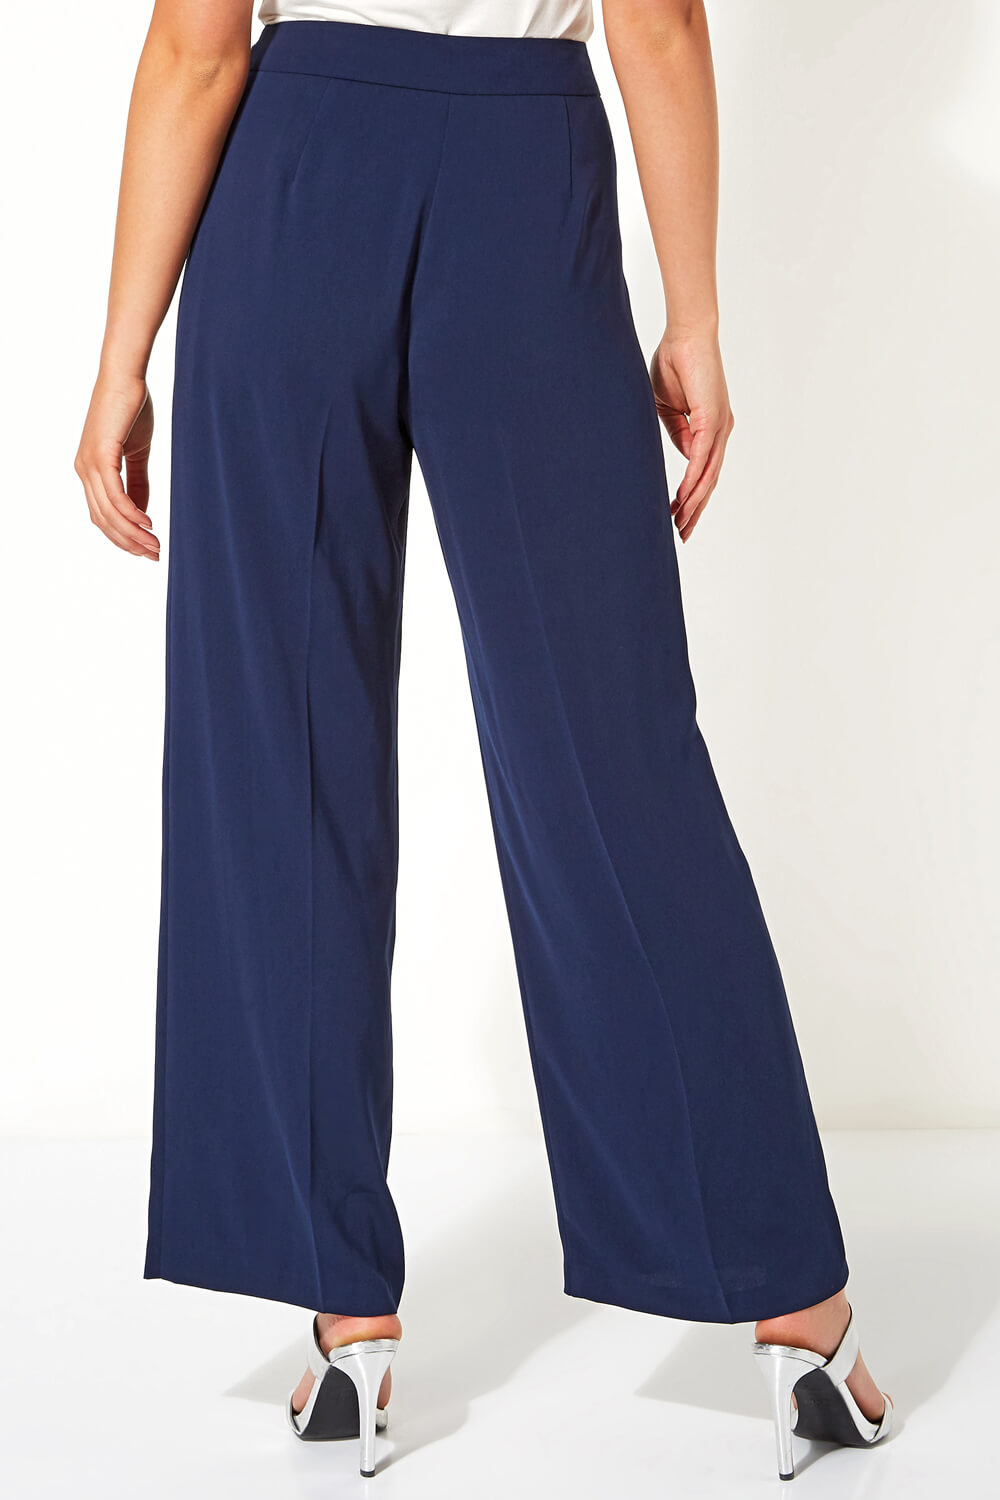 Navy  Side Tie Waist Trousers, Image 2 of 4